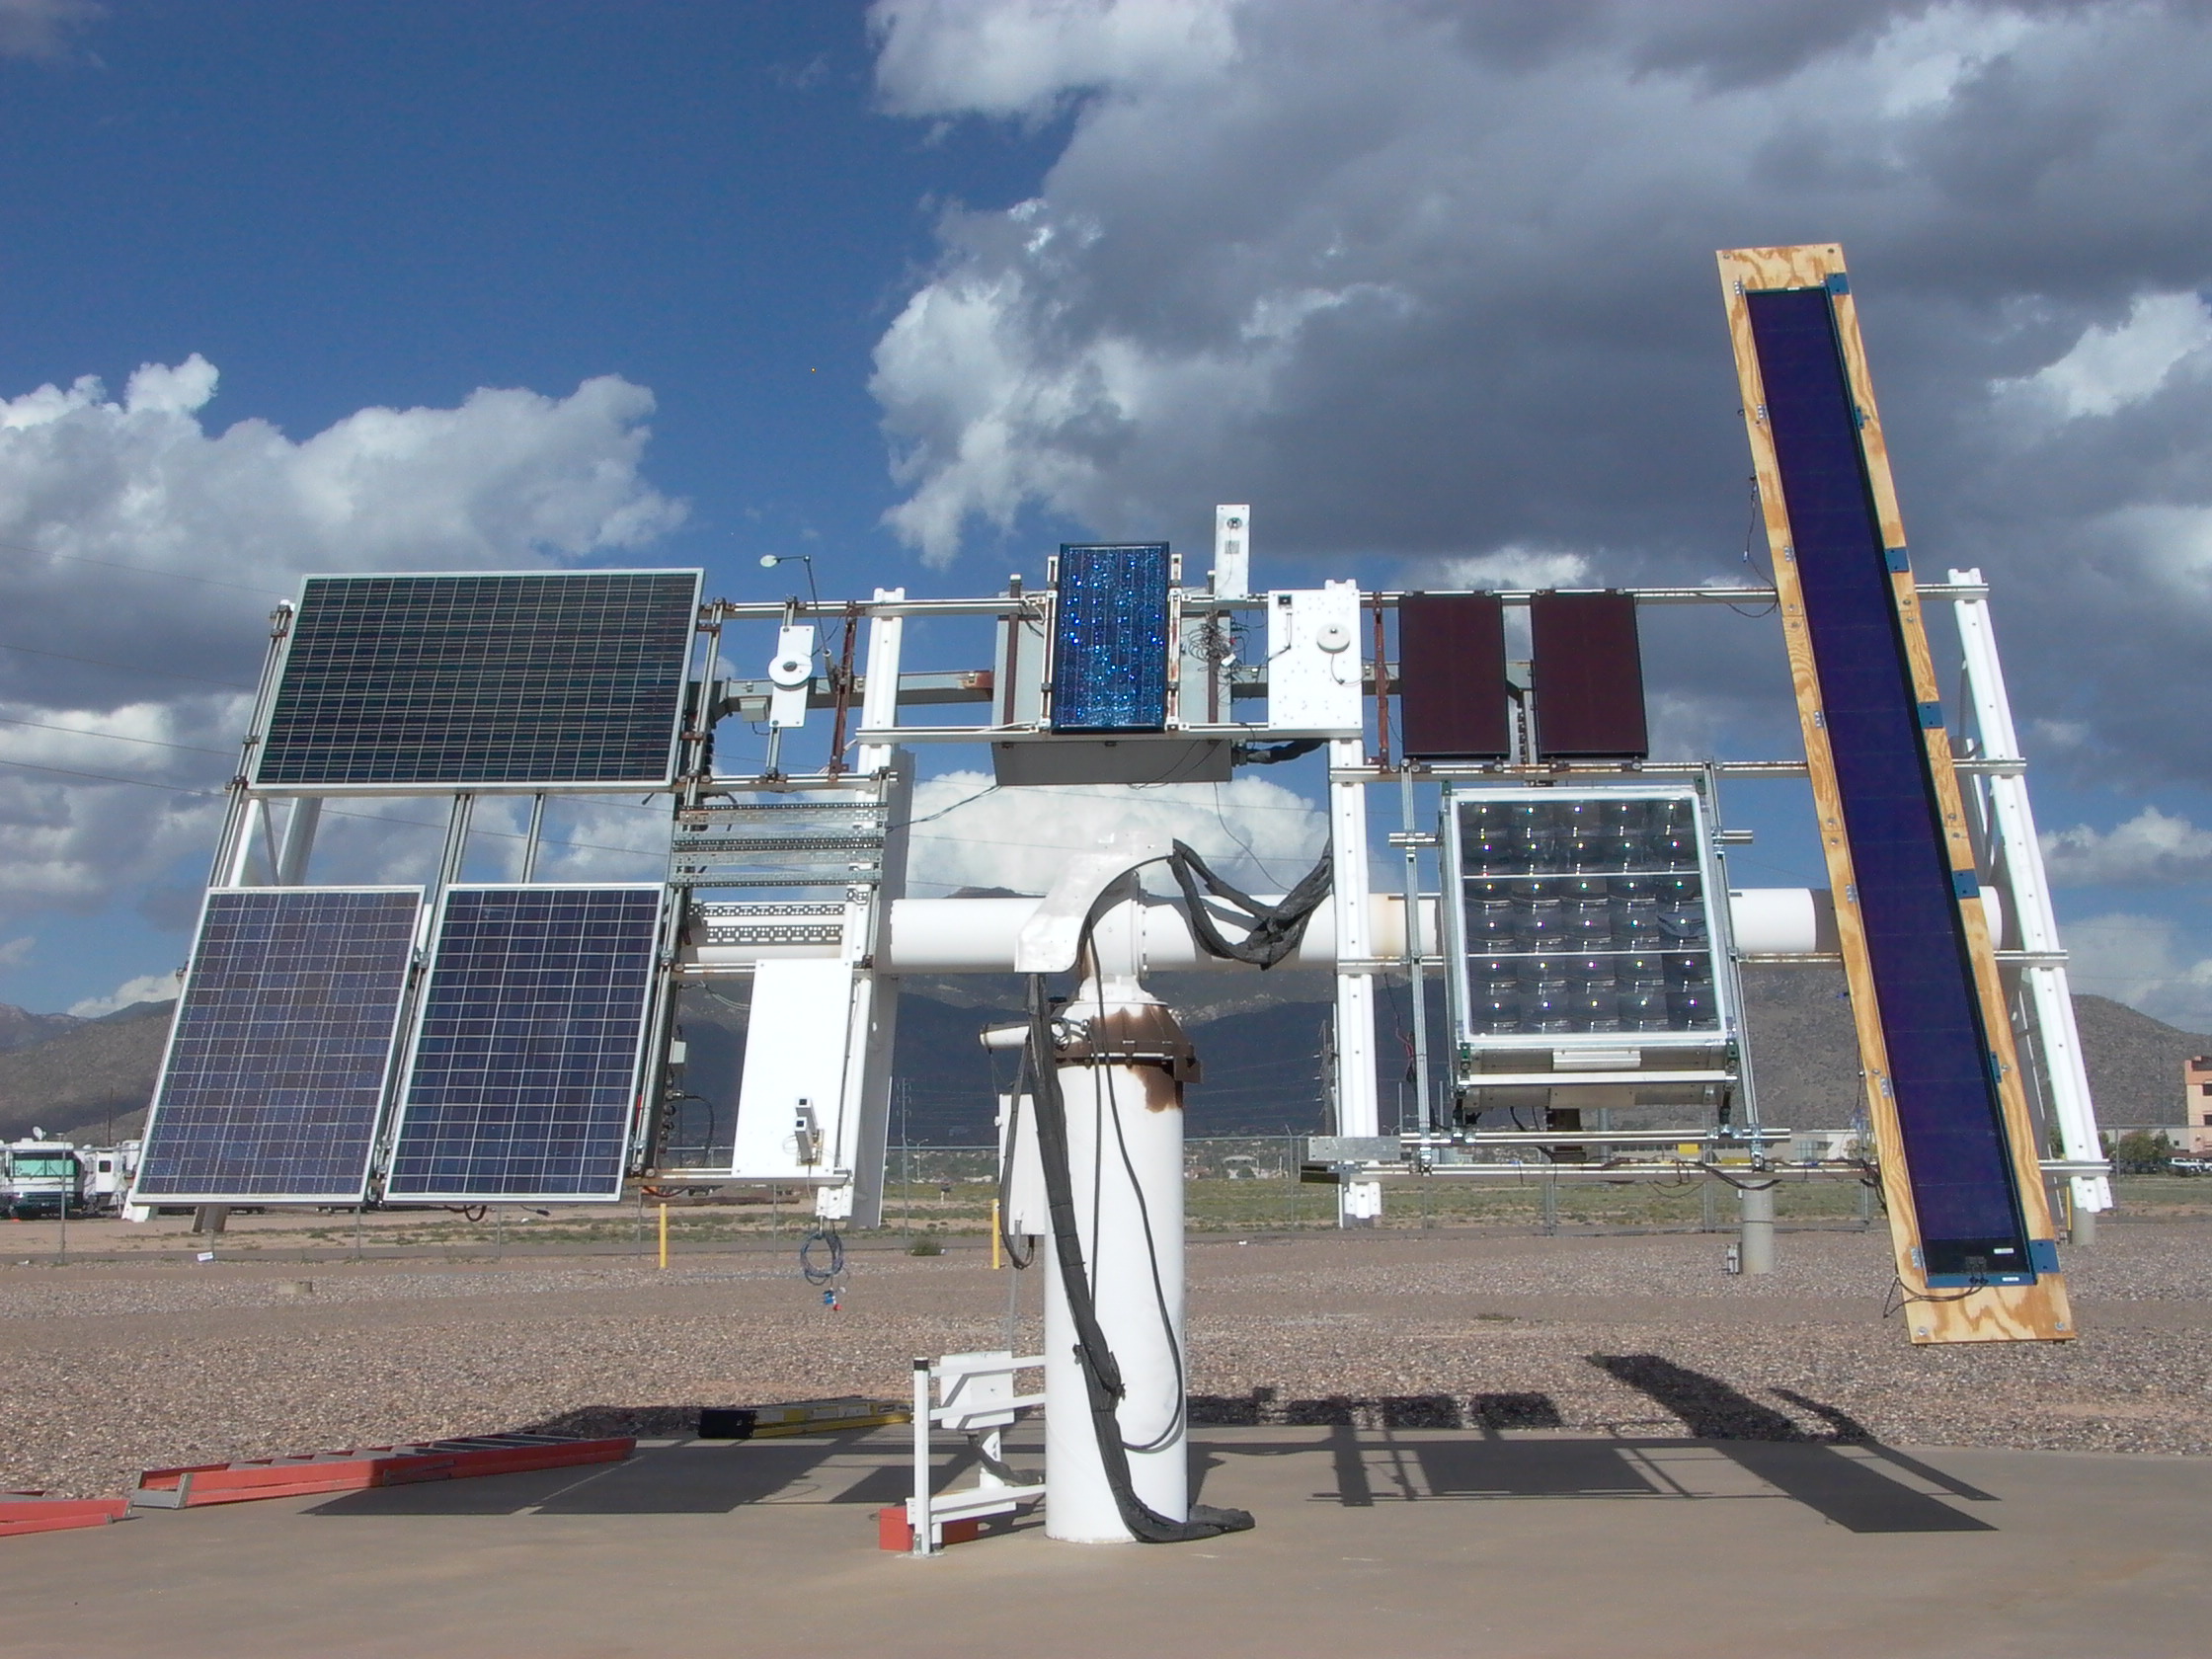 Photo of outdoor testing equipment with a variety of attached PV modules.